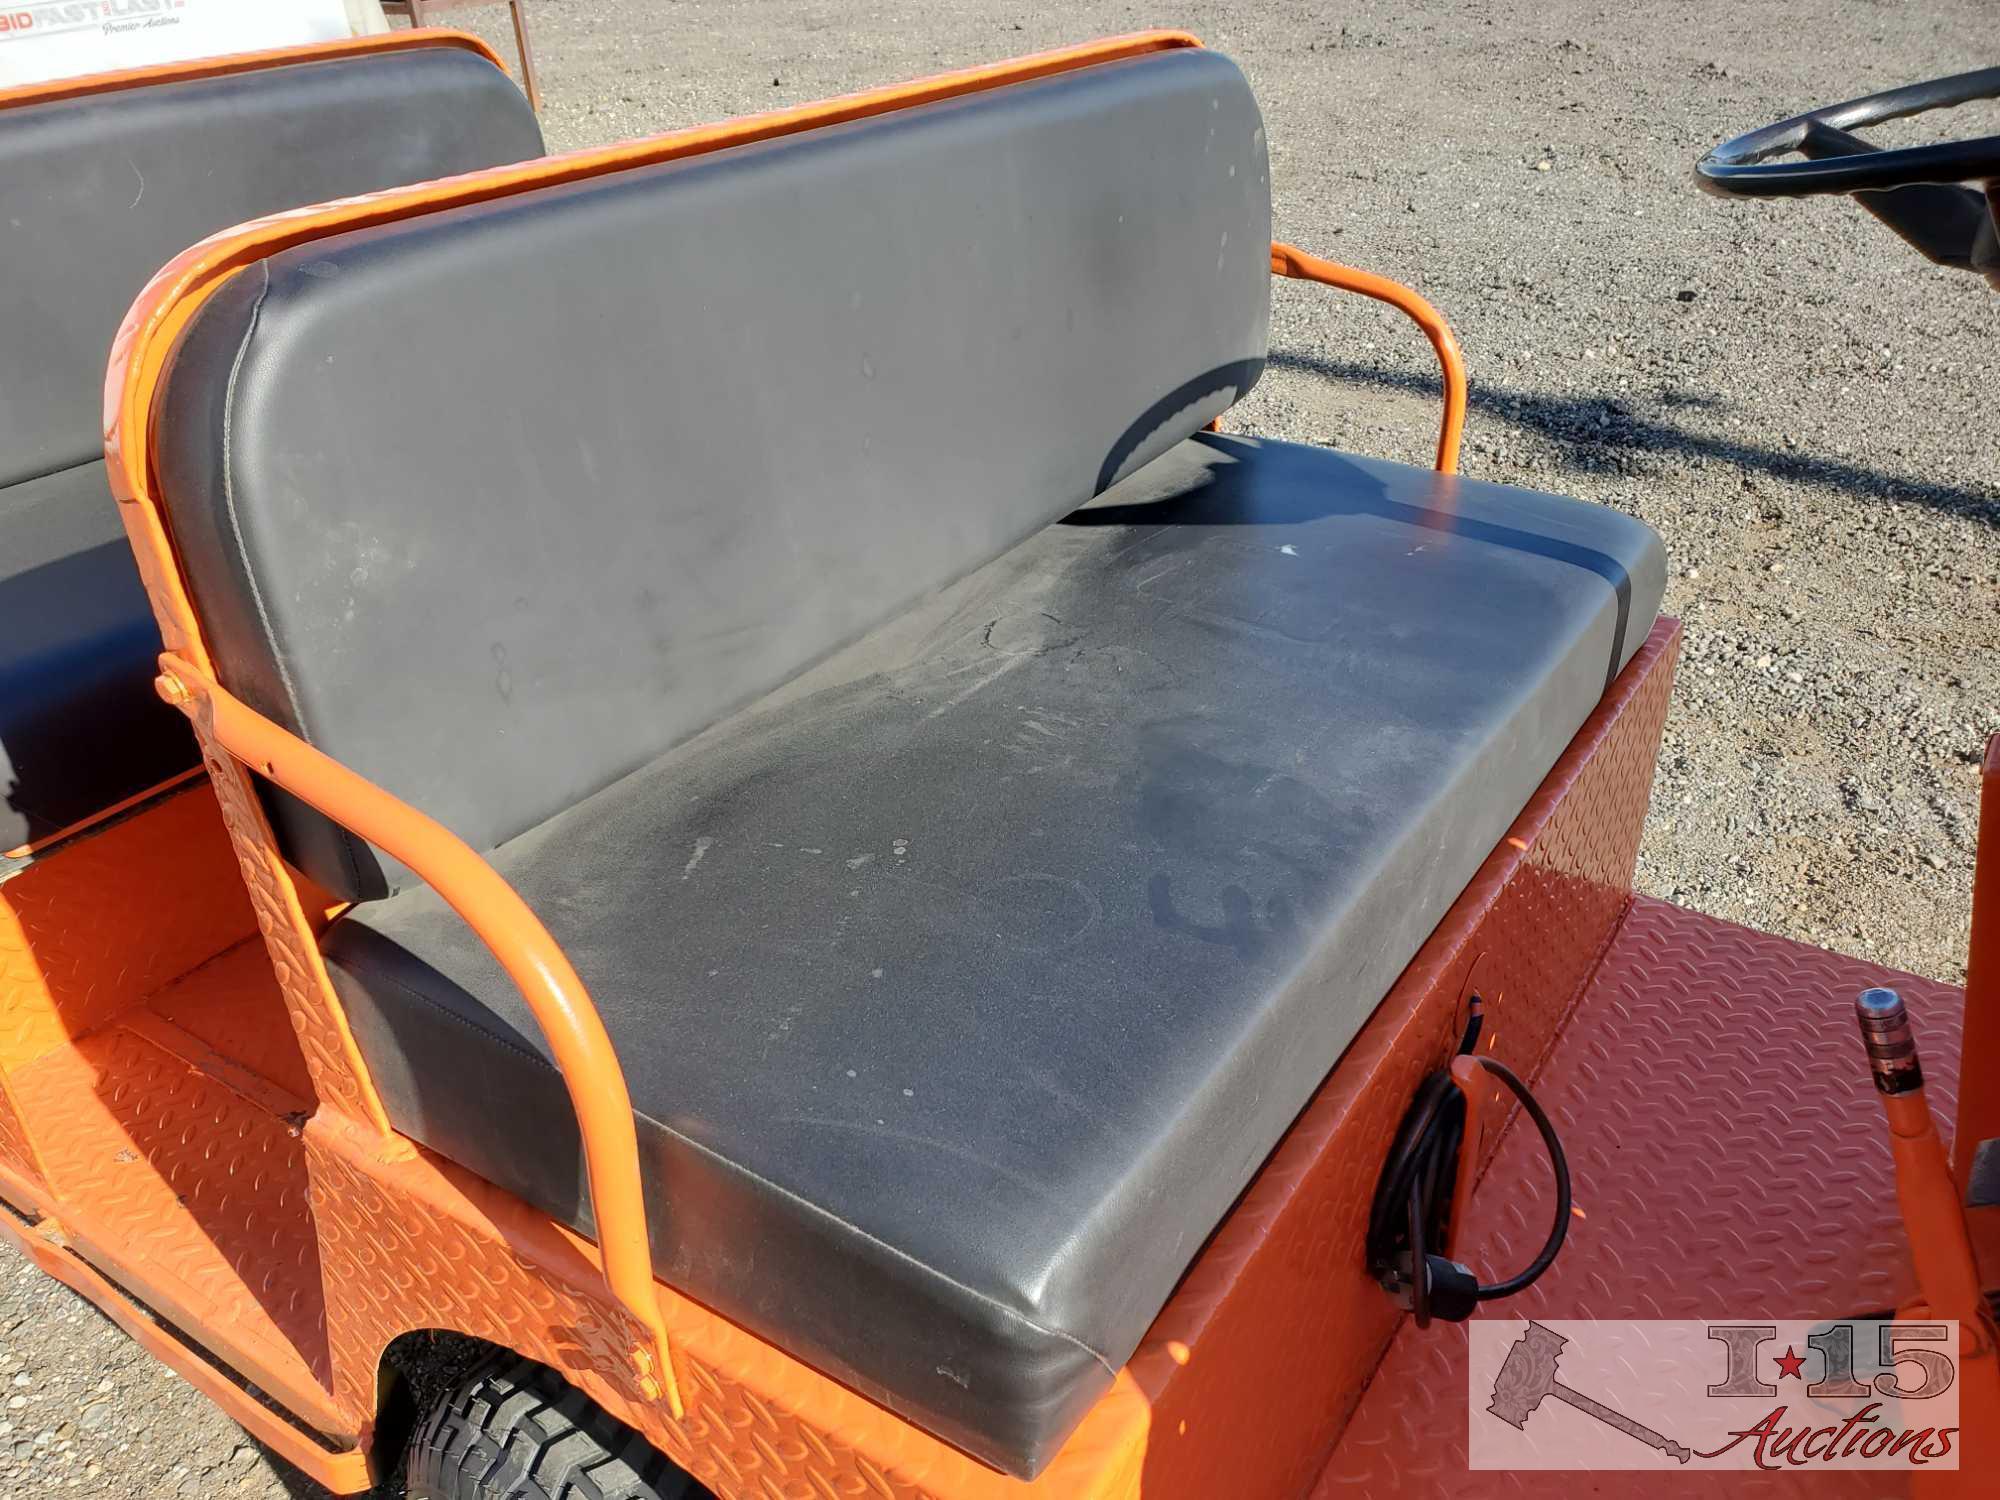 Yale Electric Utility Cart with Flat Bed